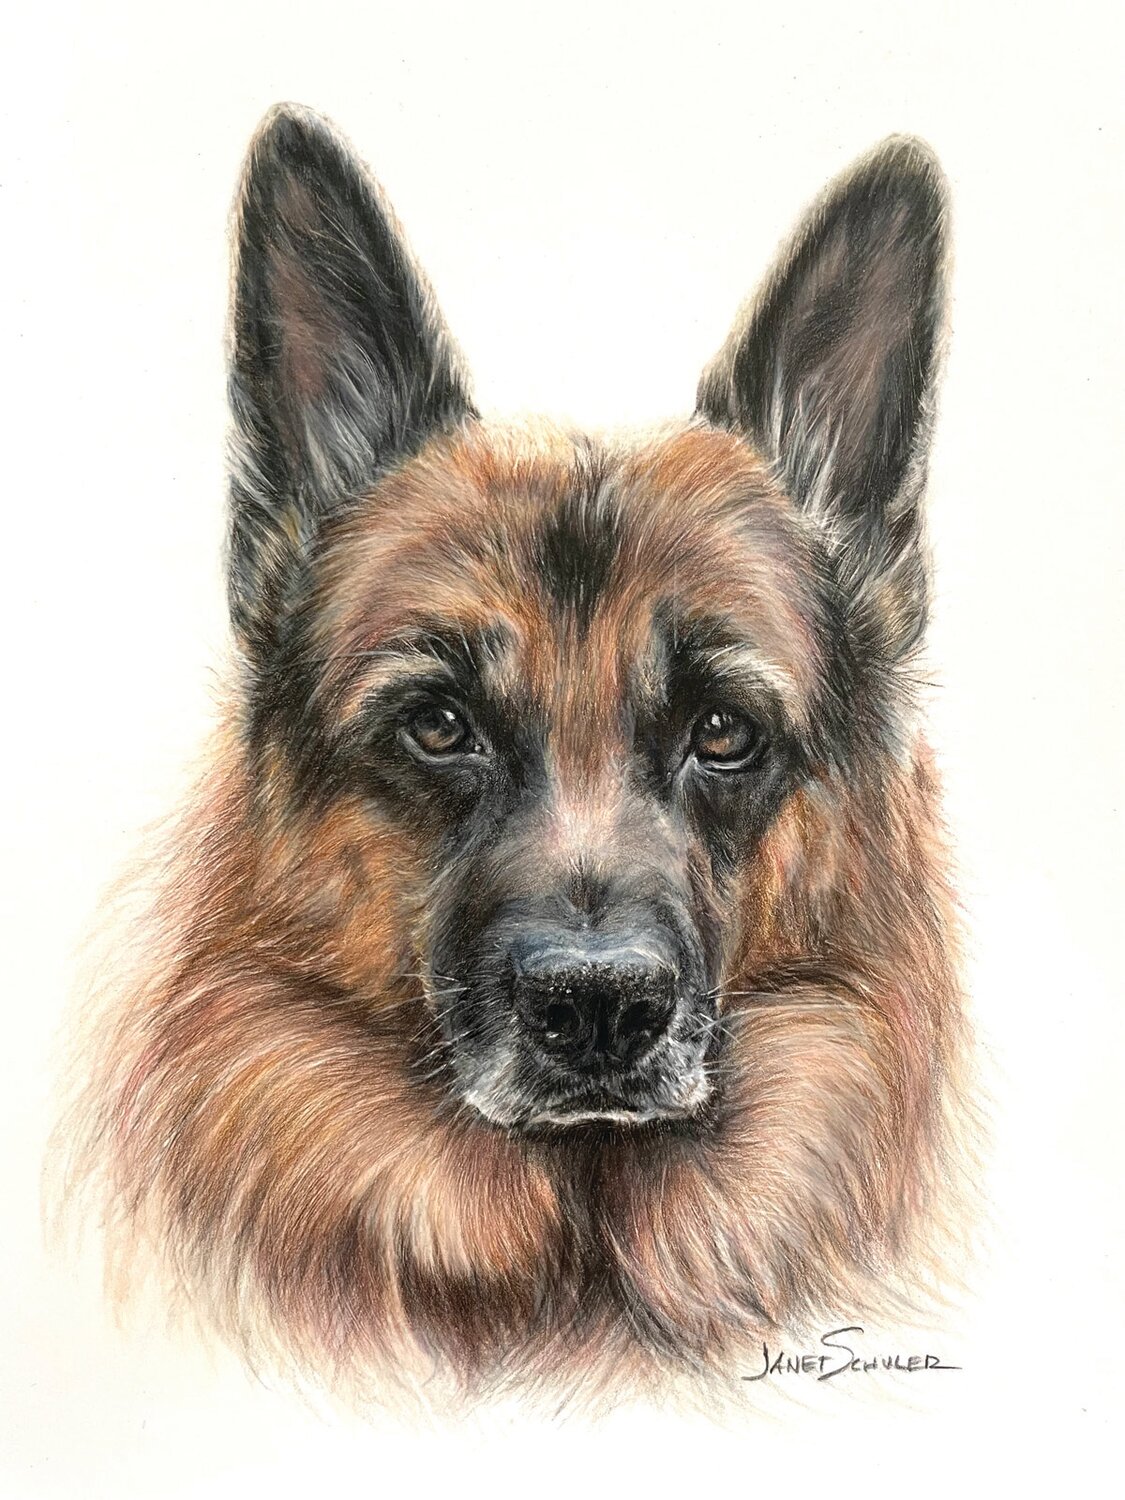 “Gunner,” a German Shepherd brought to life in colored pencils by Janet Schuler. To see more of her work, follow her Instagram page @janetschuler1732.